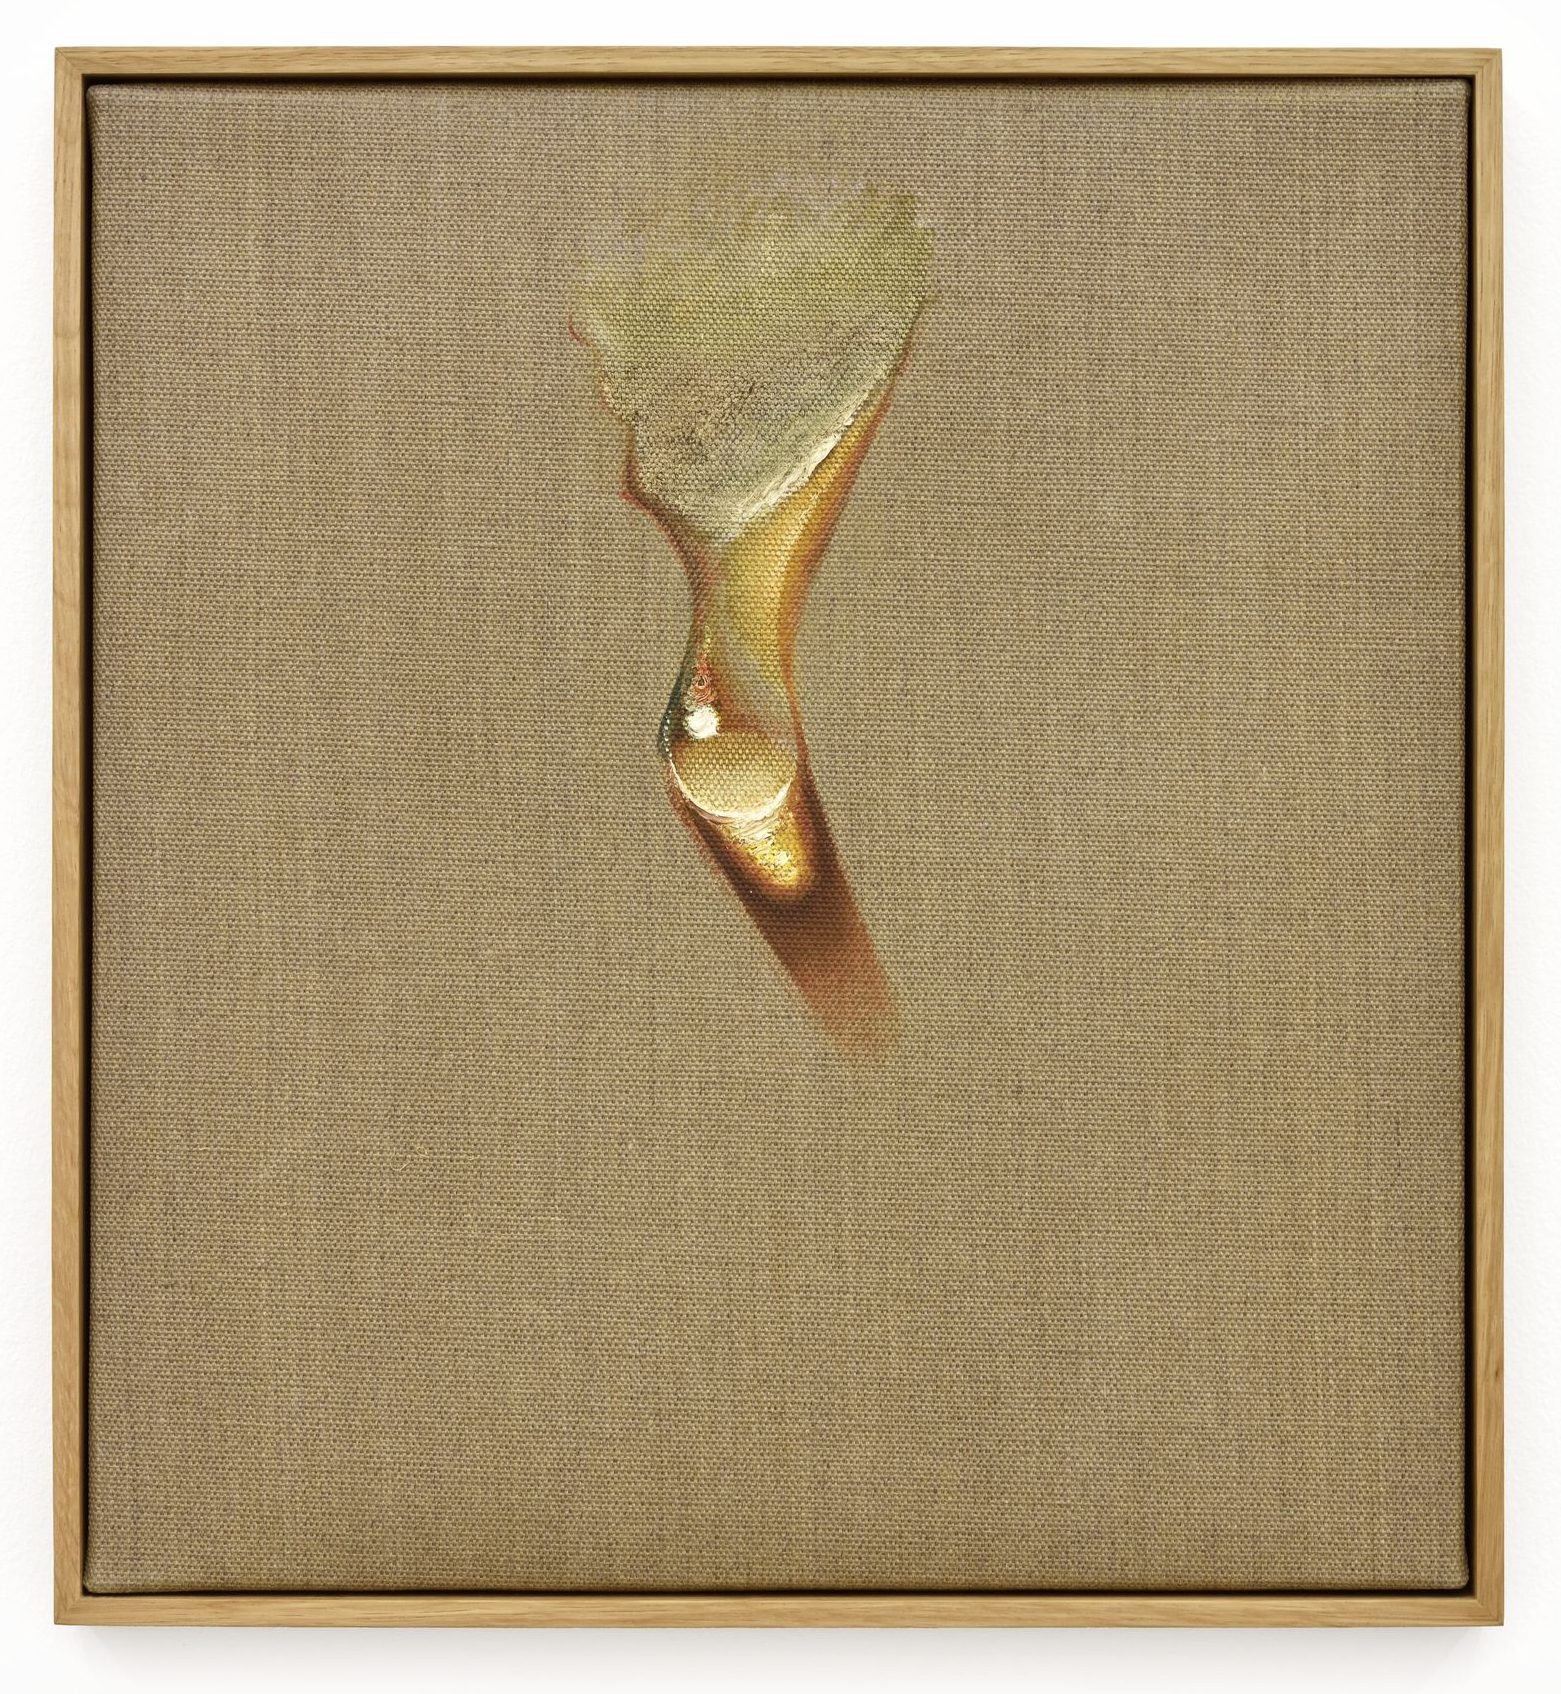 Kim Tschang-Yeul, Waterdrop, 1974 - Oil on canvas - 45 x 41 cm, 17 3/4 x 16 1/8 in / © The Estate of Kim Tschang-Yeul - Courtesy of the Estate and Almine Rech - Photo: Rebecca Fanuele